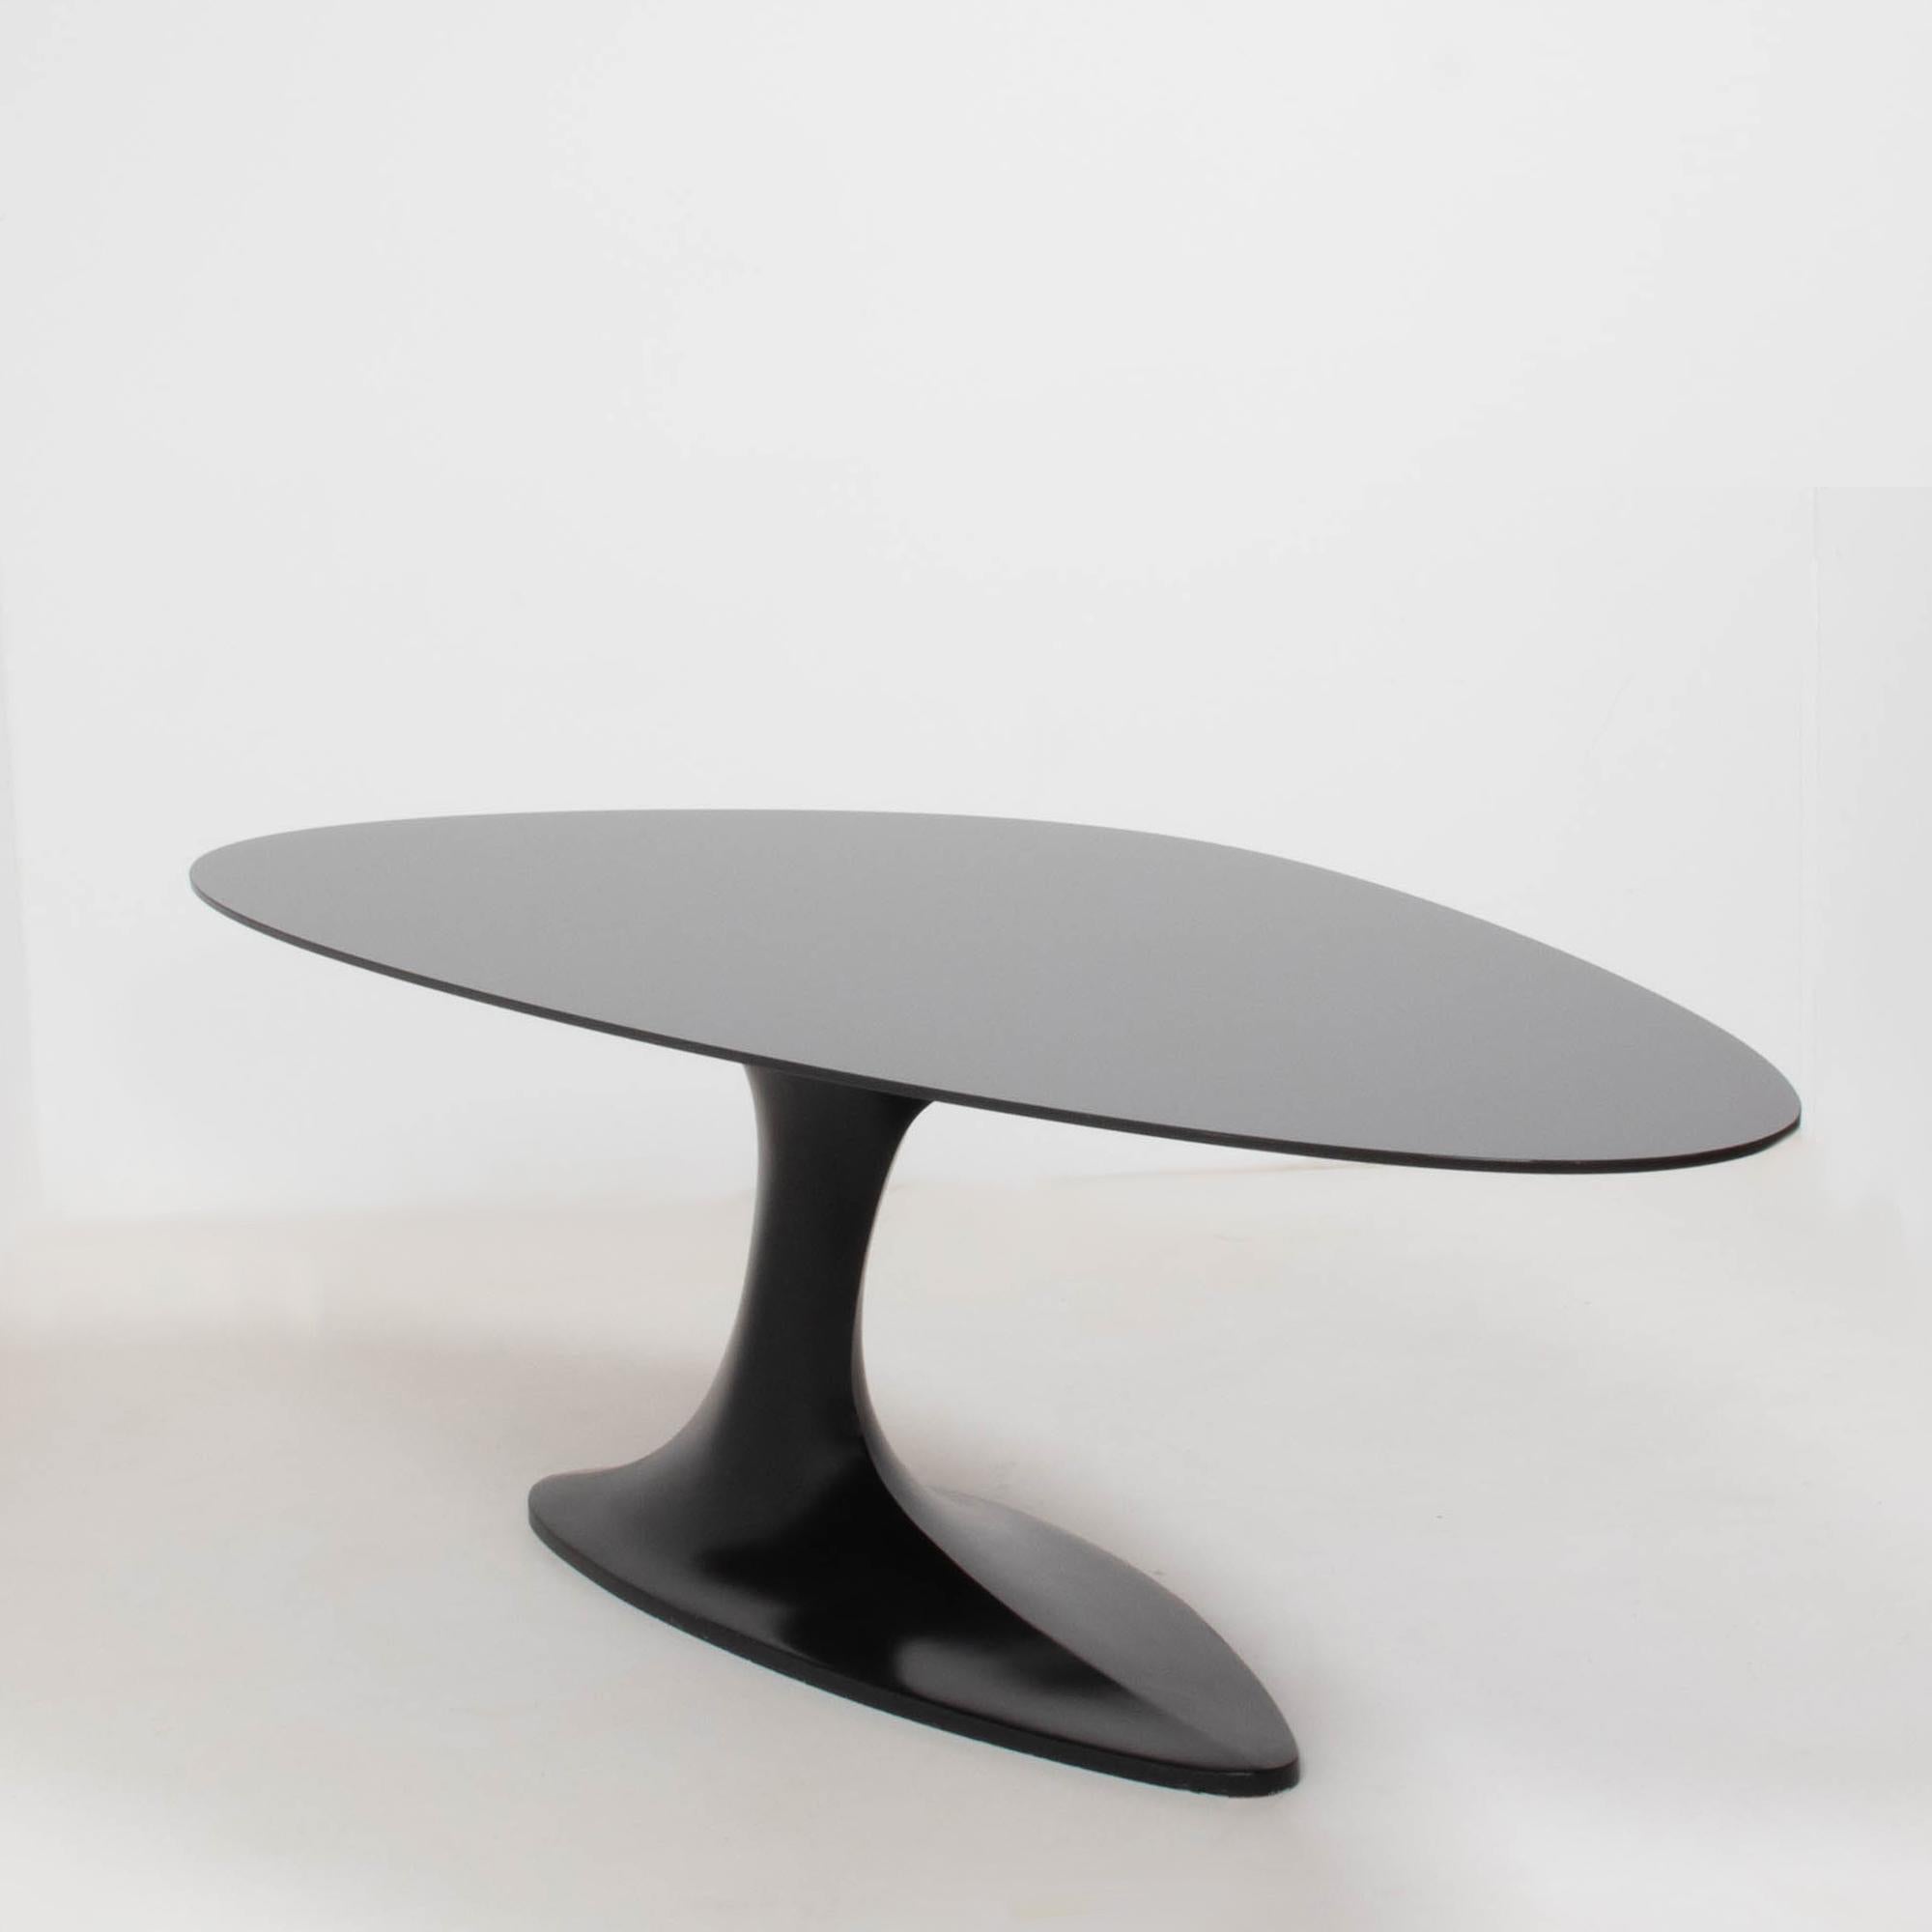 Designed by Sacha Lakic for Roche Bobois, the ‘Speed Up’ collection was a limited edition series inspired by movement, asymmetry and speed.

The dining table features an elliptical black glass top, sitting on a single black fibre-resin pedestal